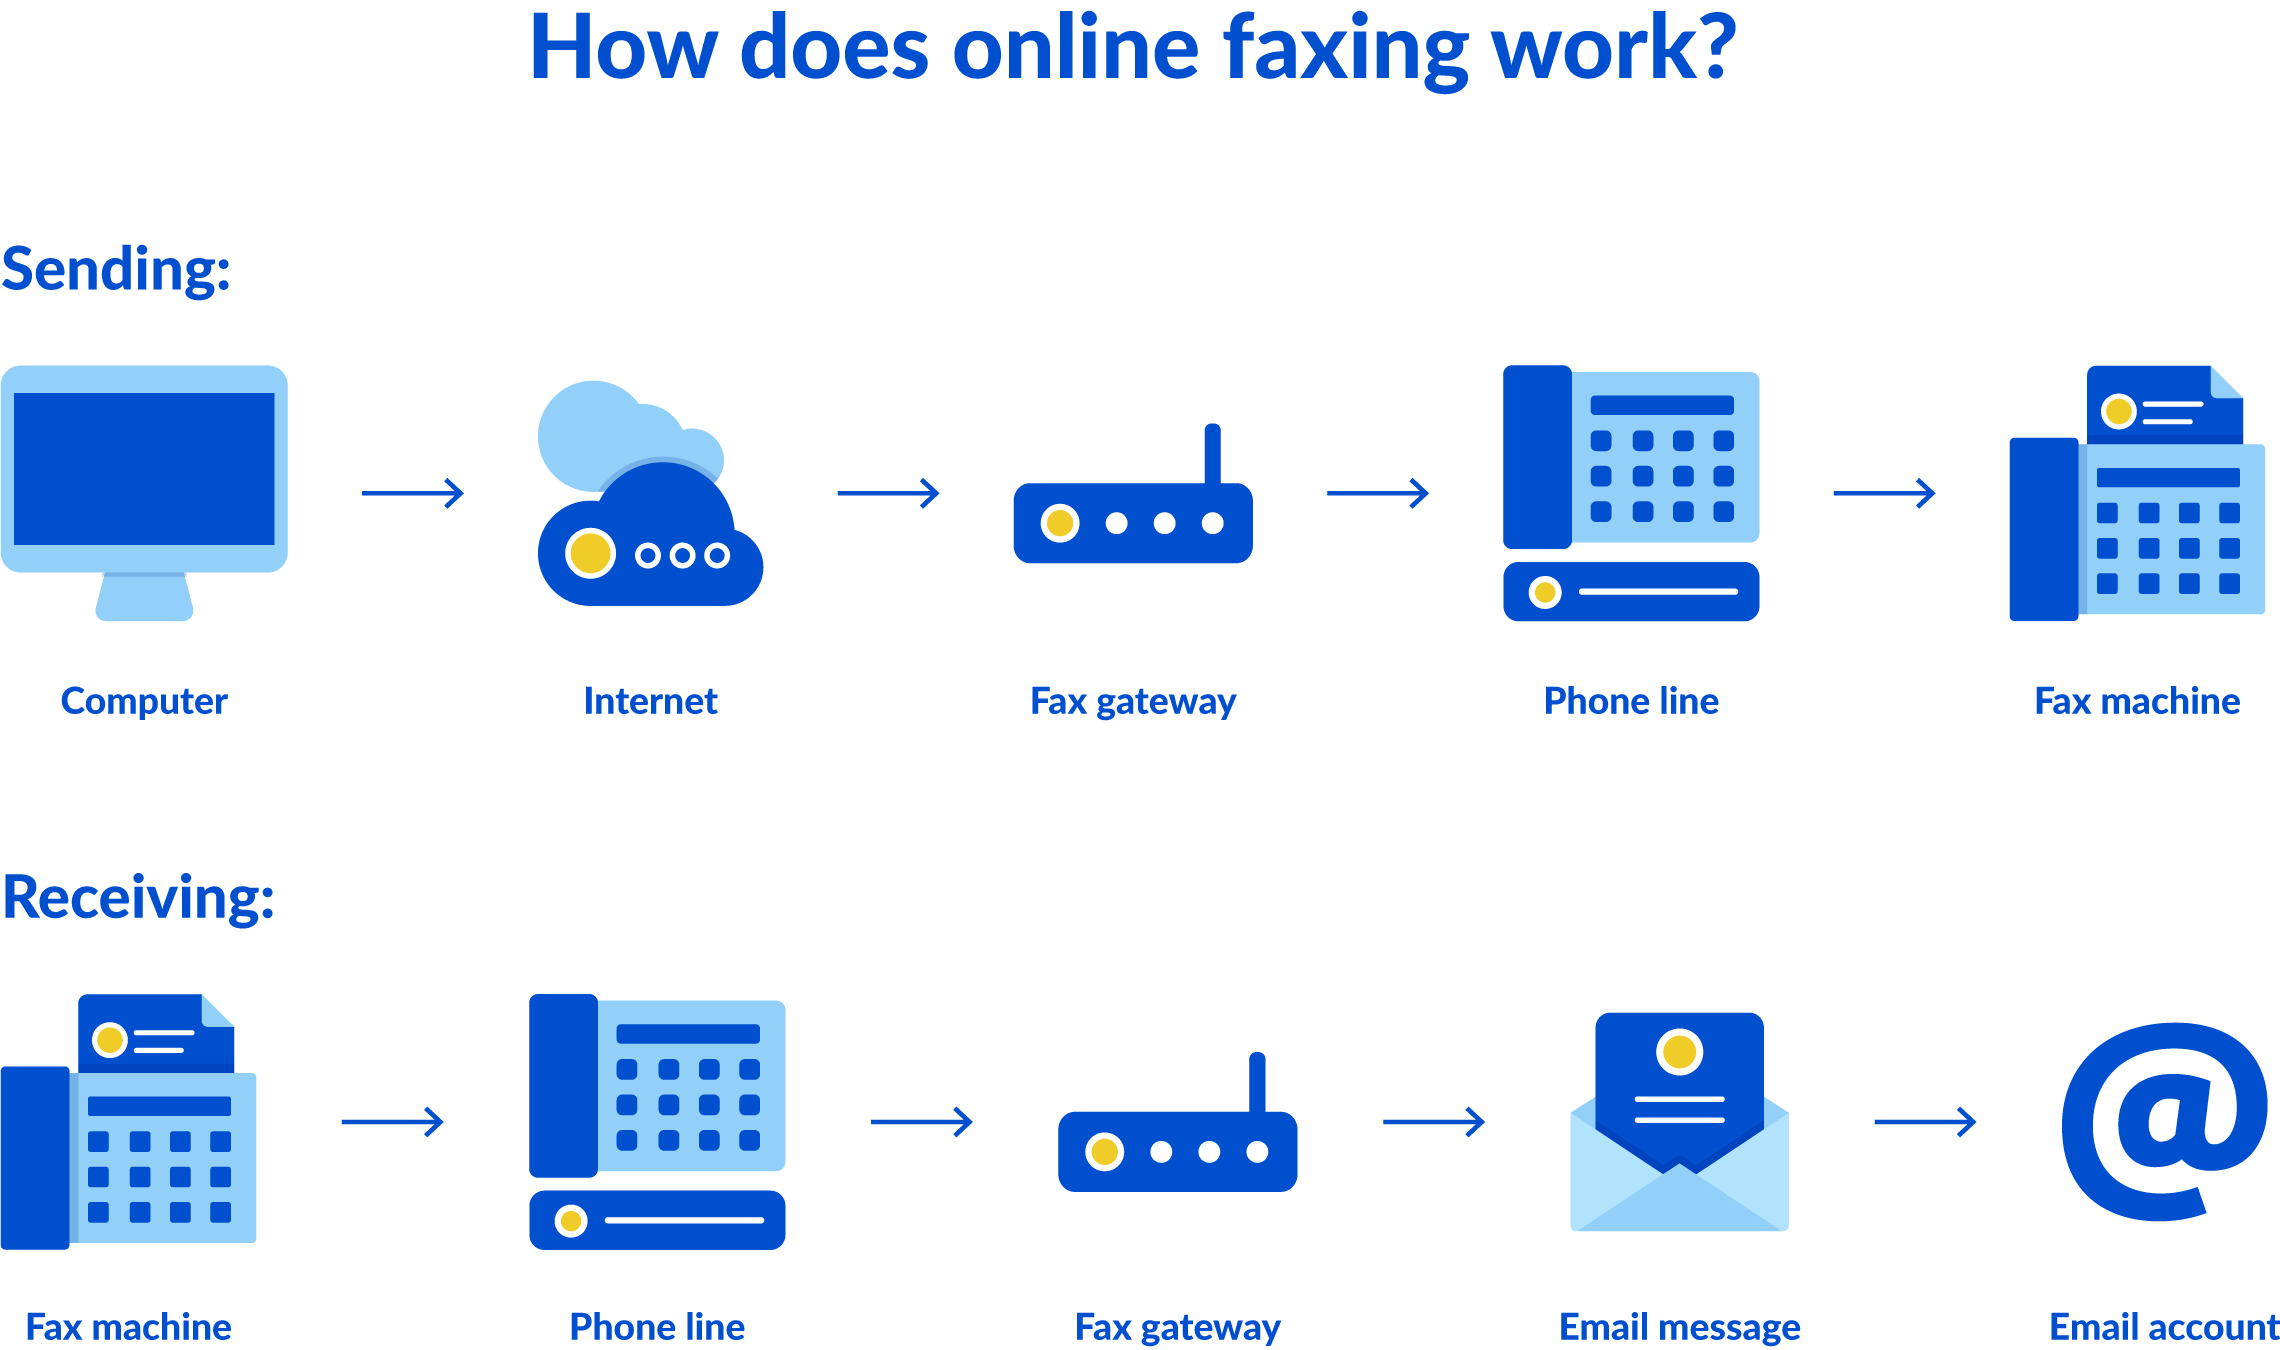 How online faxing works